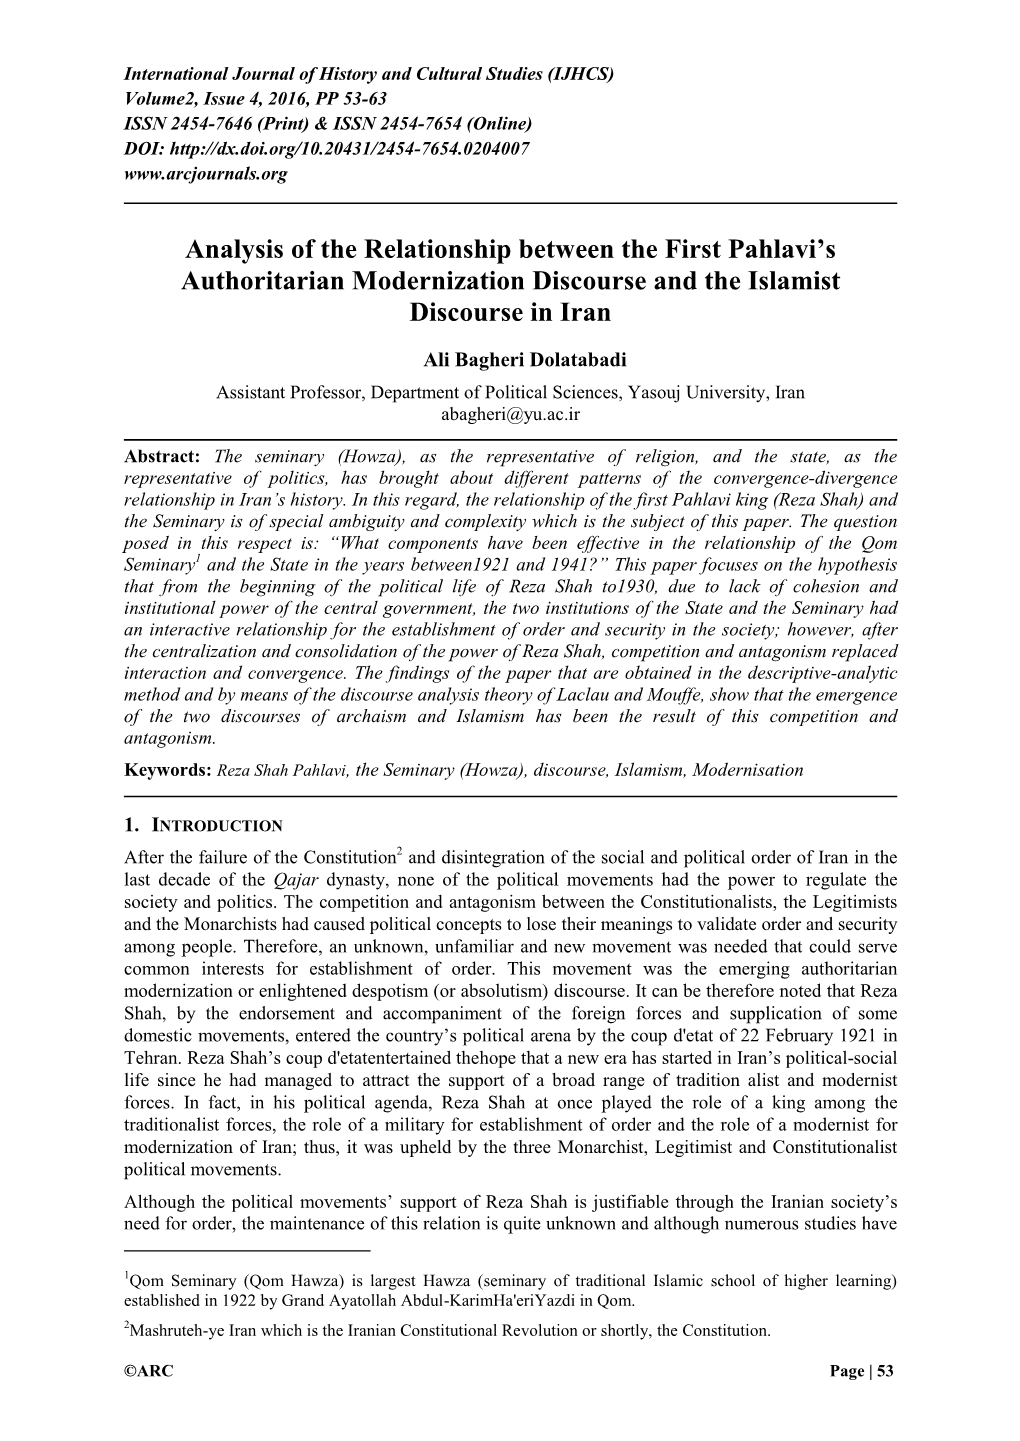 Analysis of the Relationship Between the First Pahlavi's Authoritarian